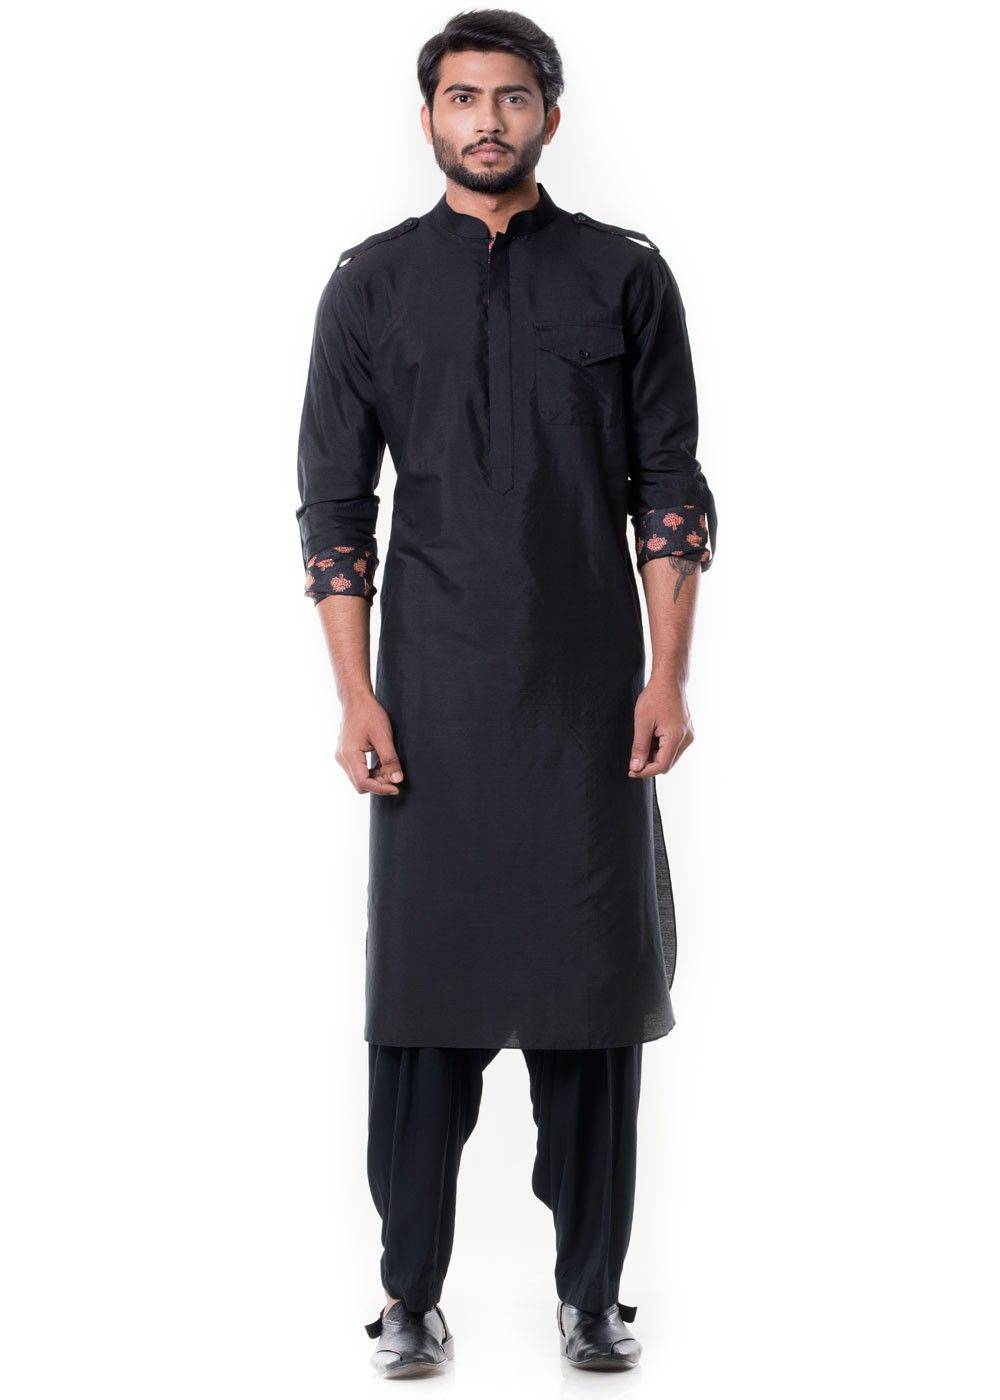 Buy Latest Pathani Suit For Men Online in India at G3fashion